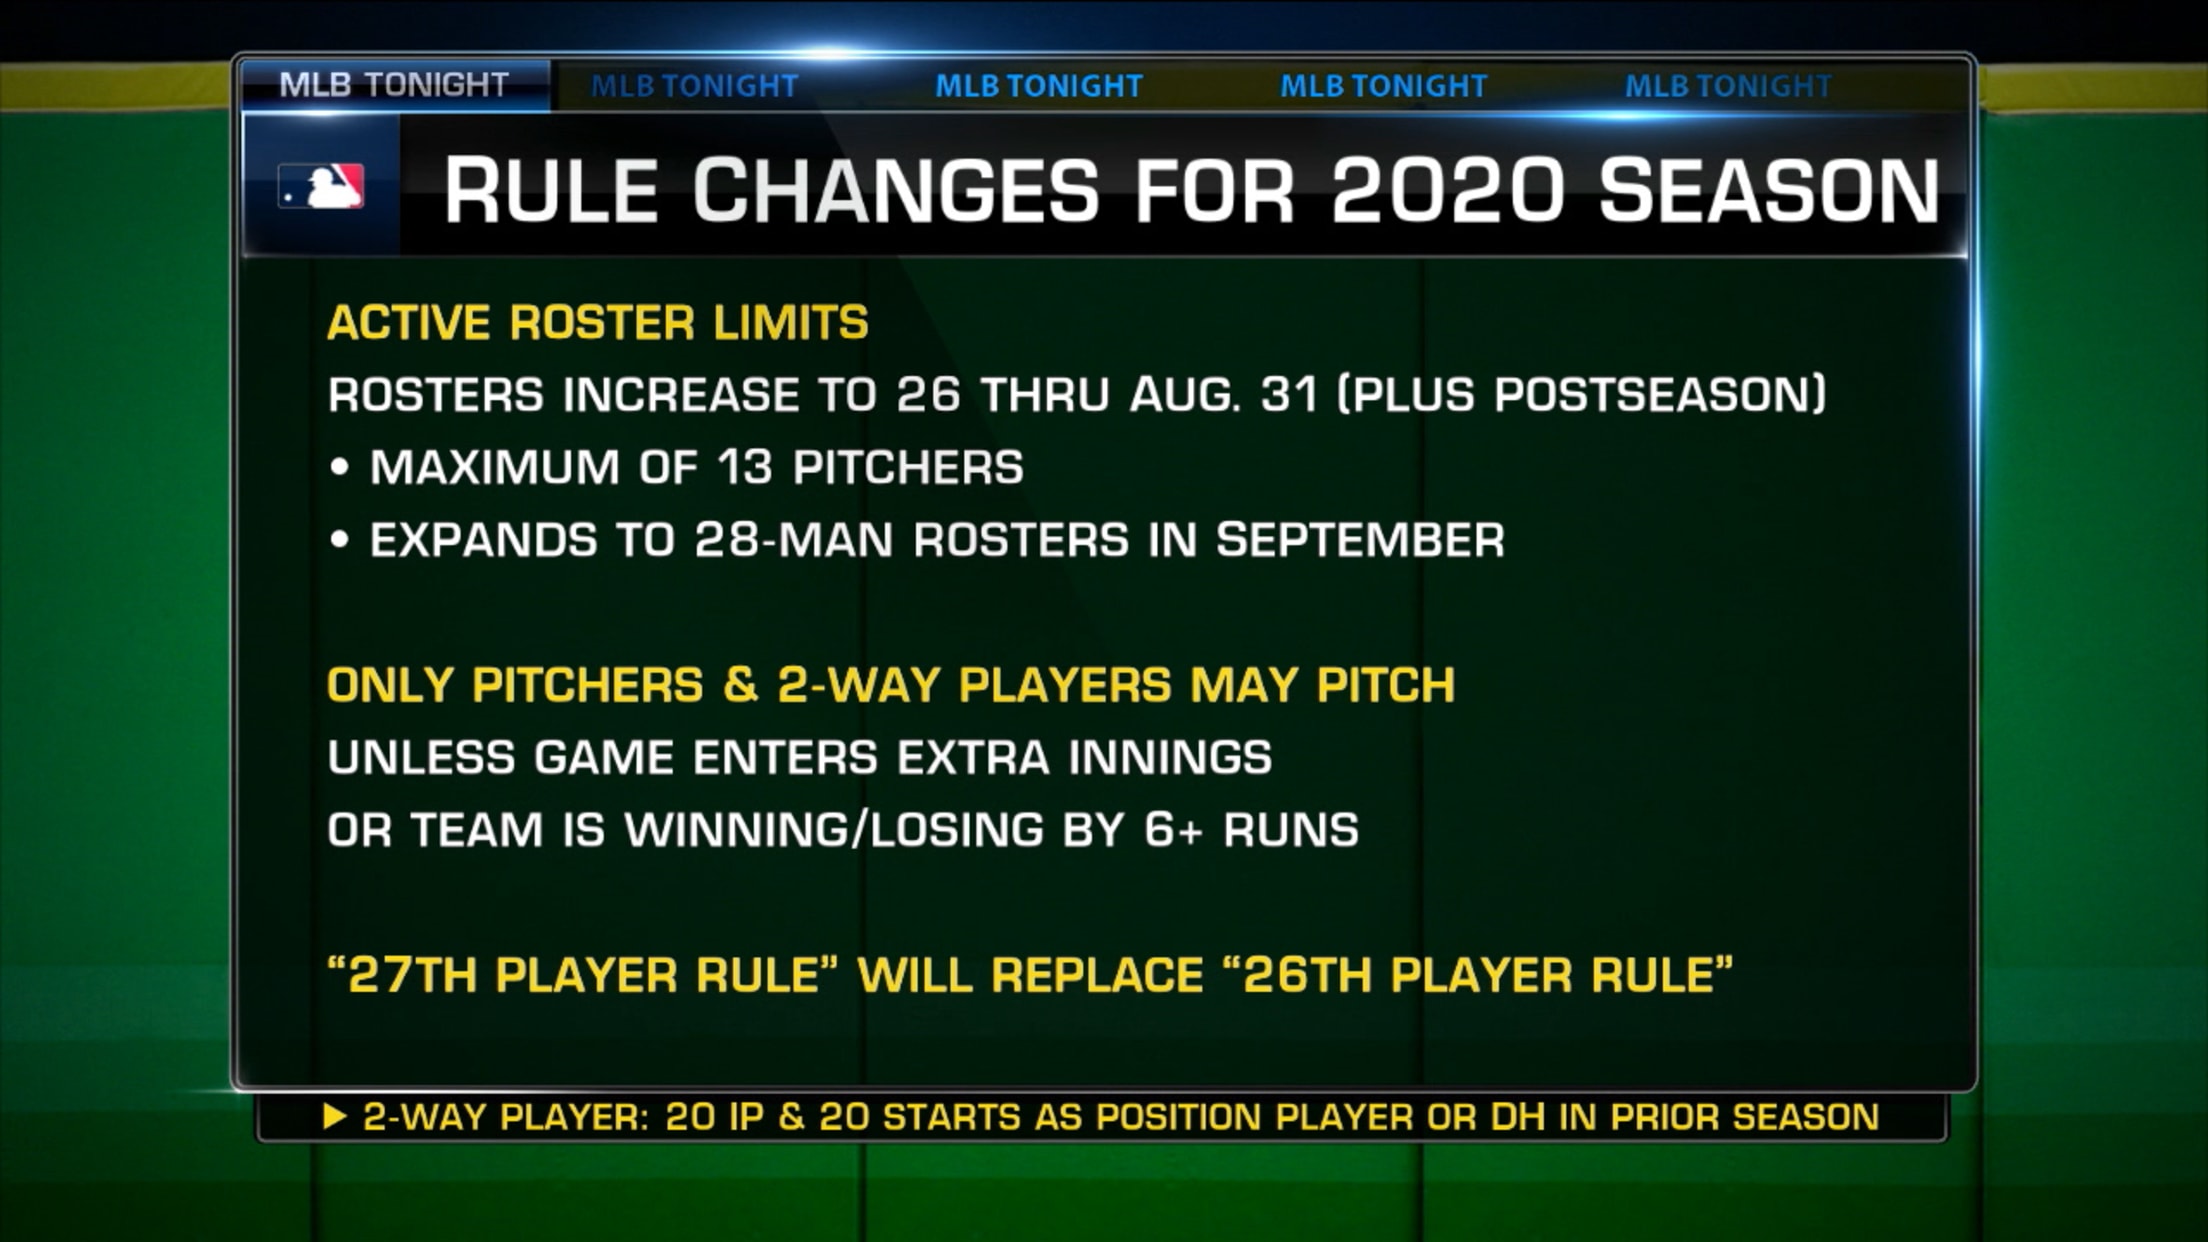 MLB Tonight on new rule changes